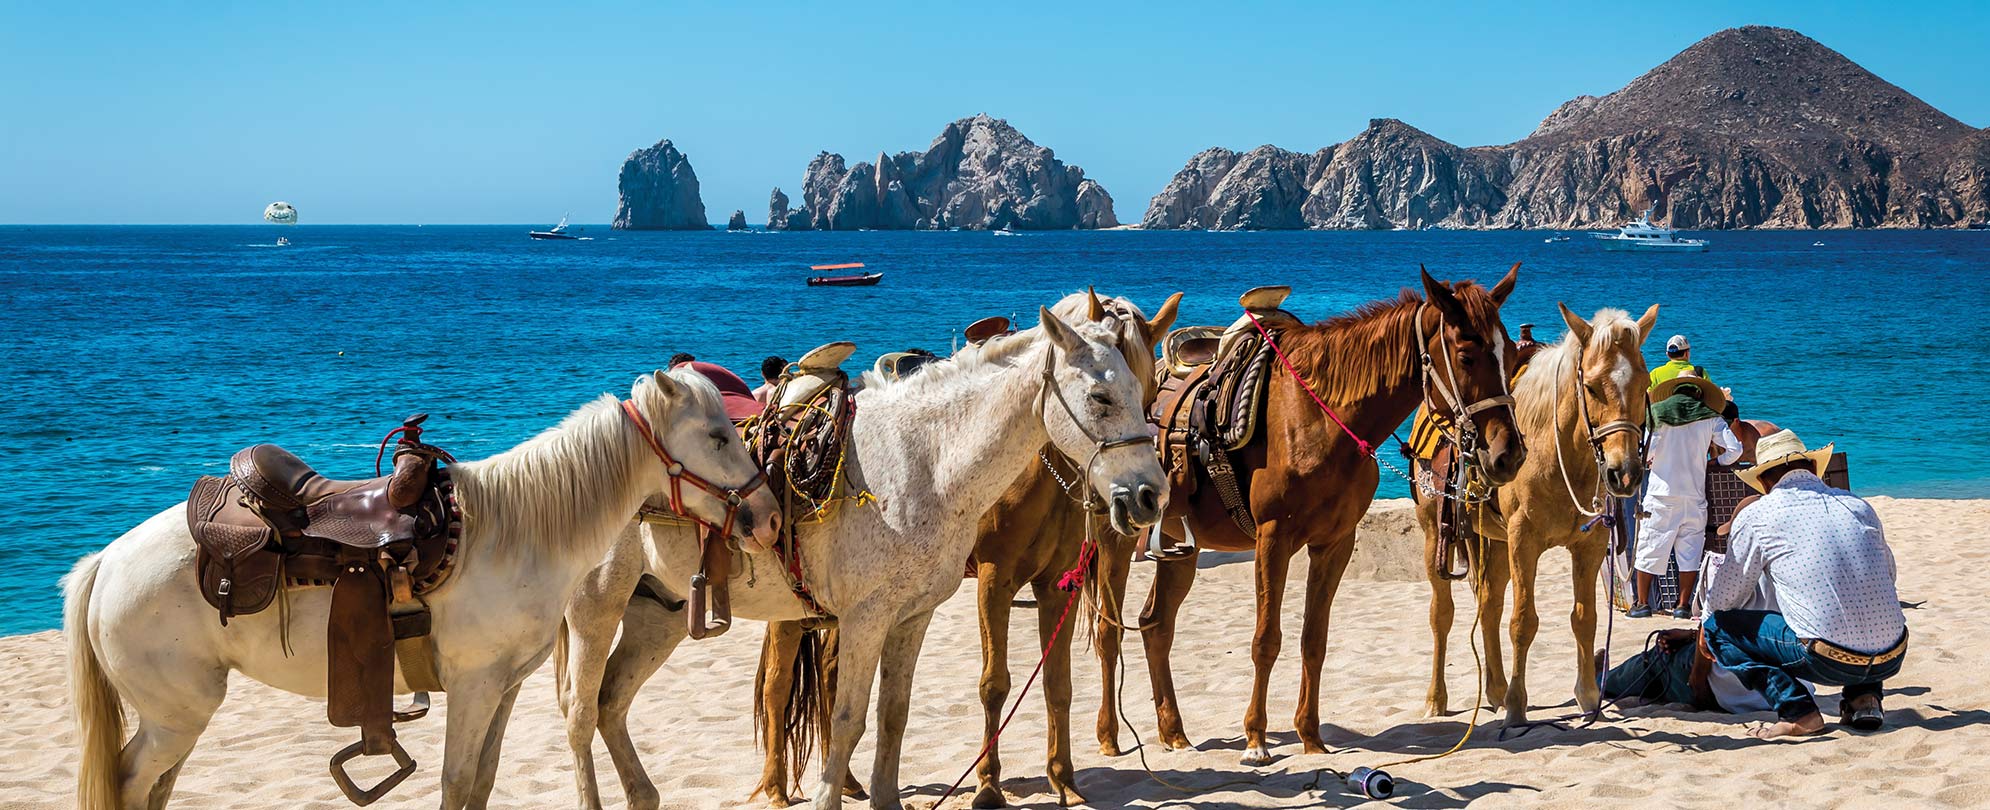 A group of saddled horses on a beach in the Caribbean.